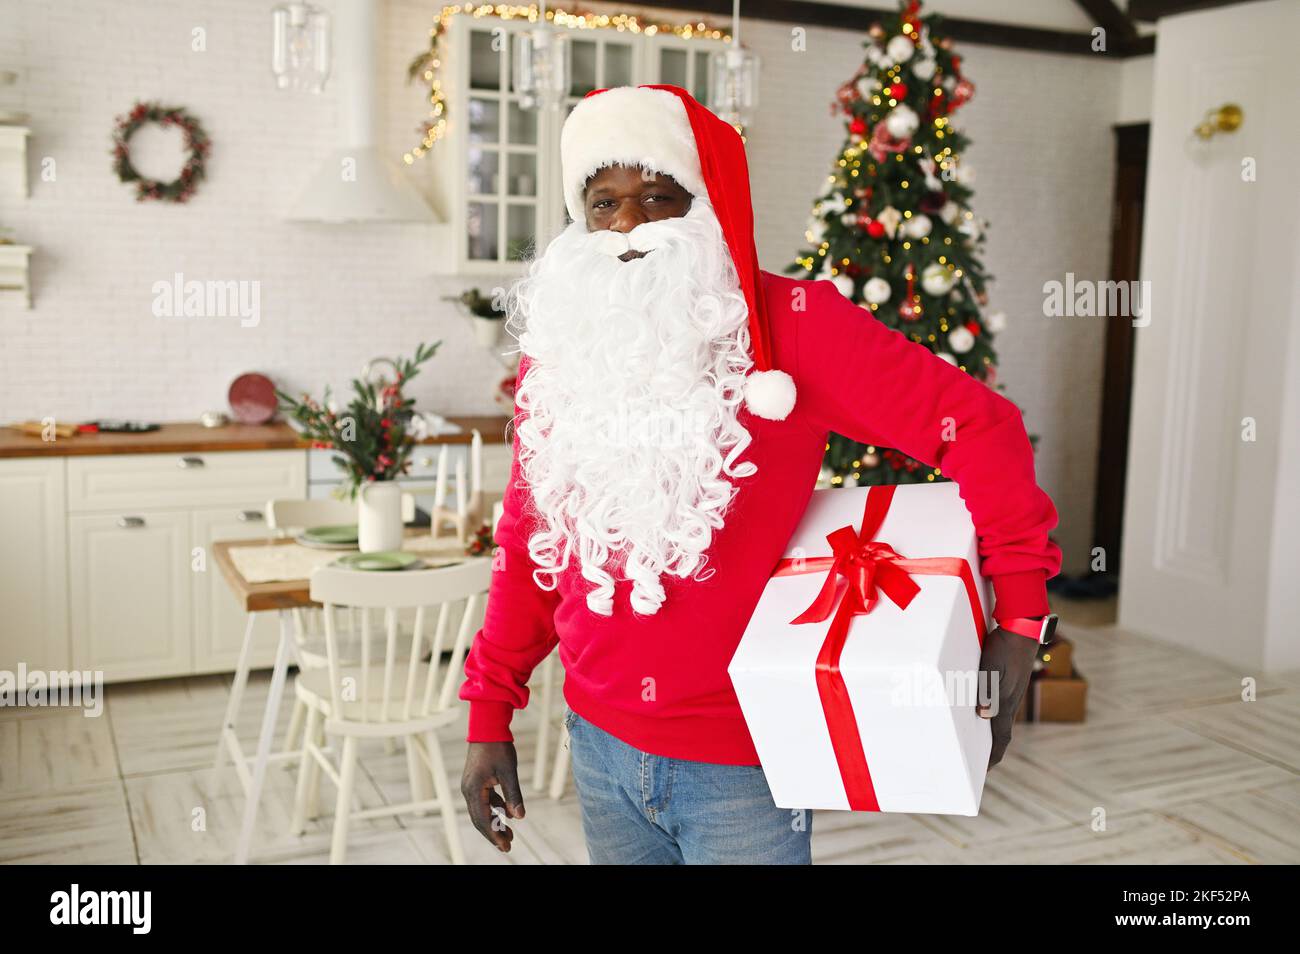 african american man in a red sweater with a white false beard and a santa hat smiles and holds a large white box with a red ribbon in his hands on Stock Photo